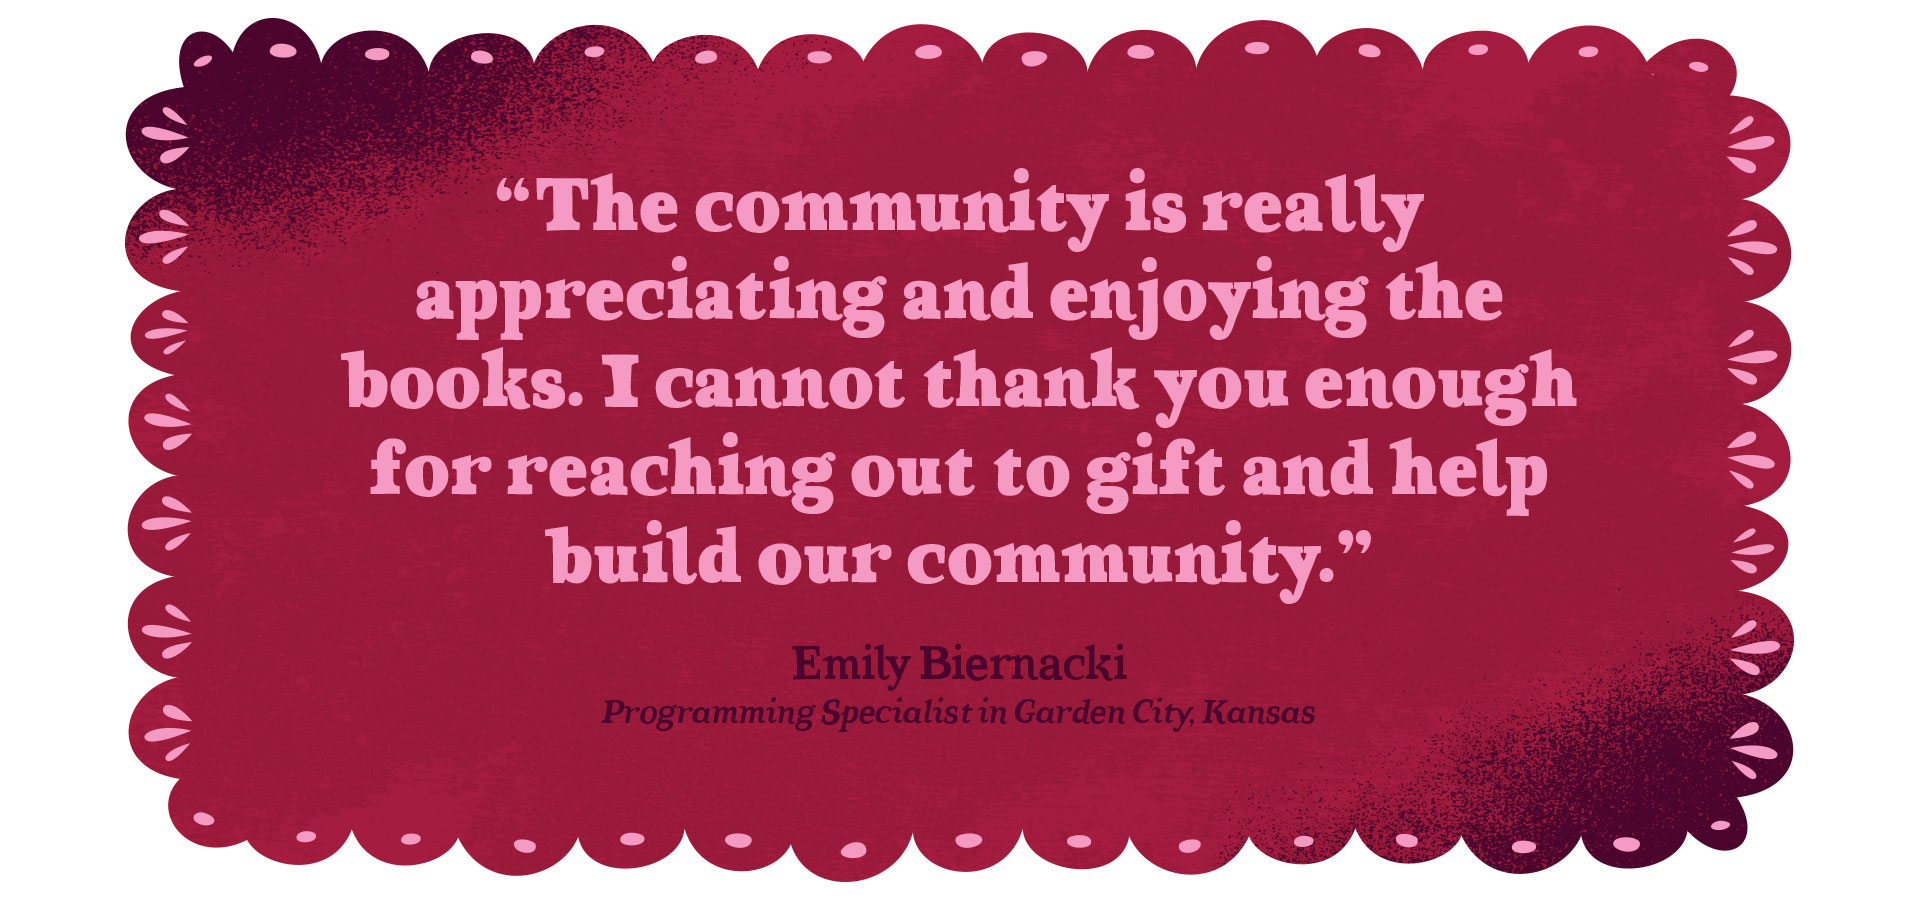 Quote graphic - "The community is really appreciating and enjoying the books. I cannot thank you enough for reaching out to gift and help build our community." Emily Biernacki, Programming Specialist in Garden City, Kansas